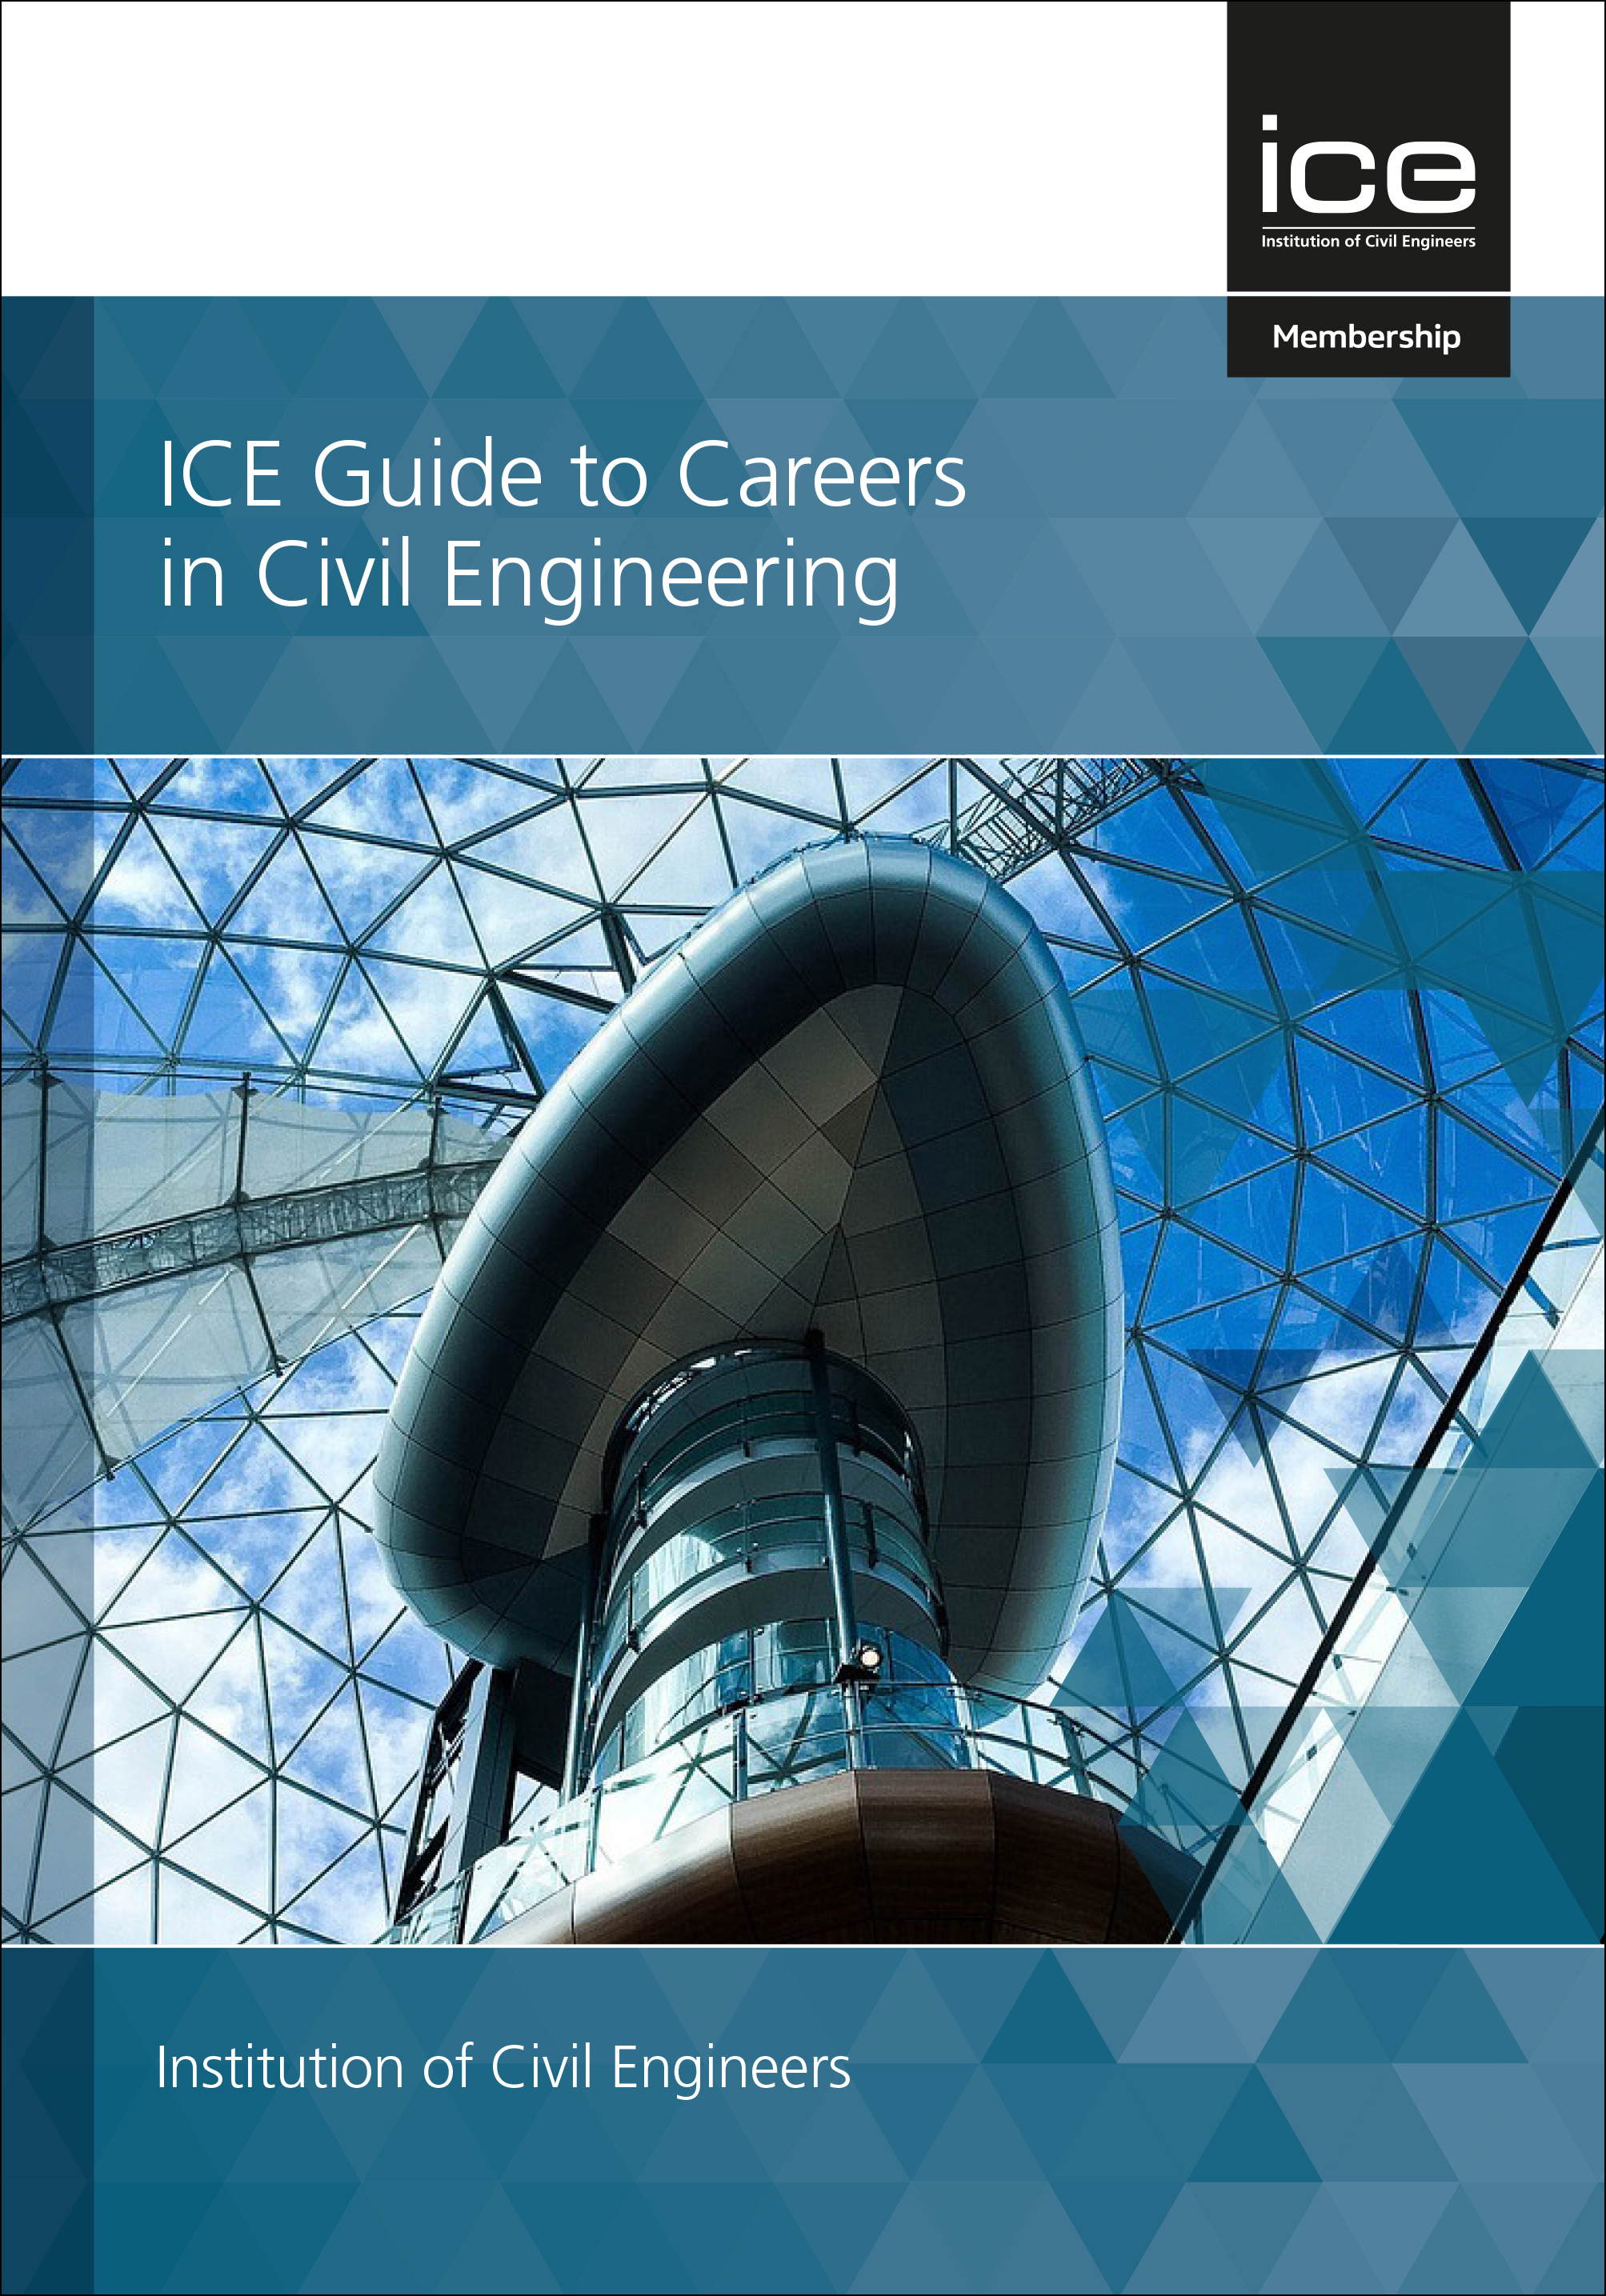 ICE Guide to Careers in Civil Engineering